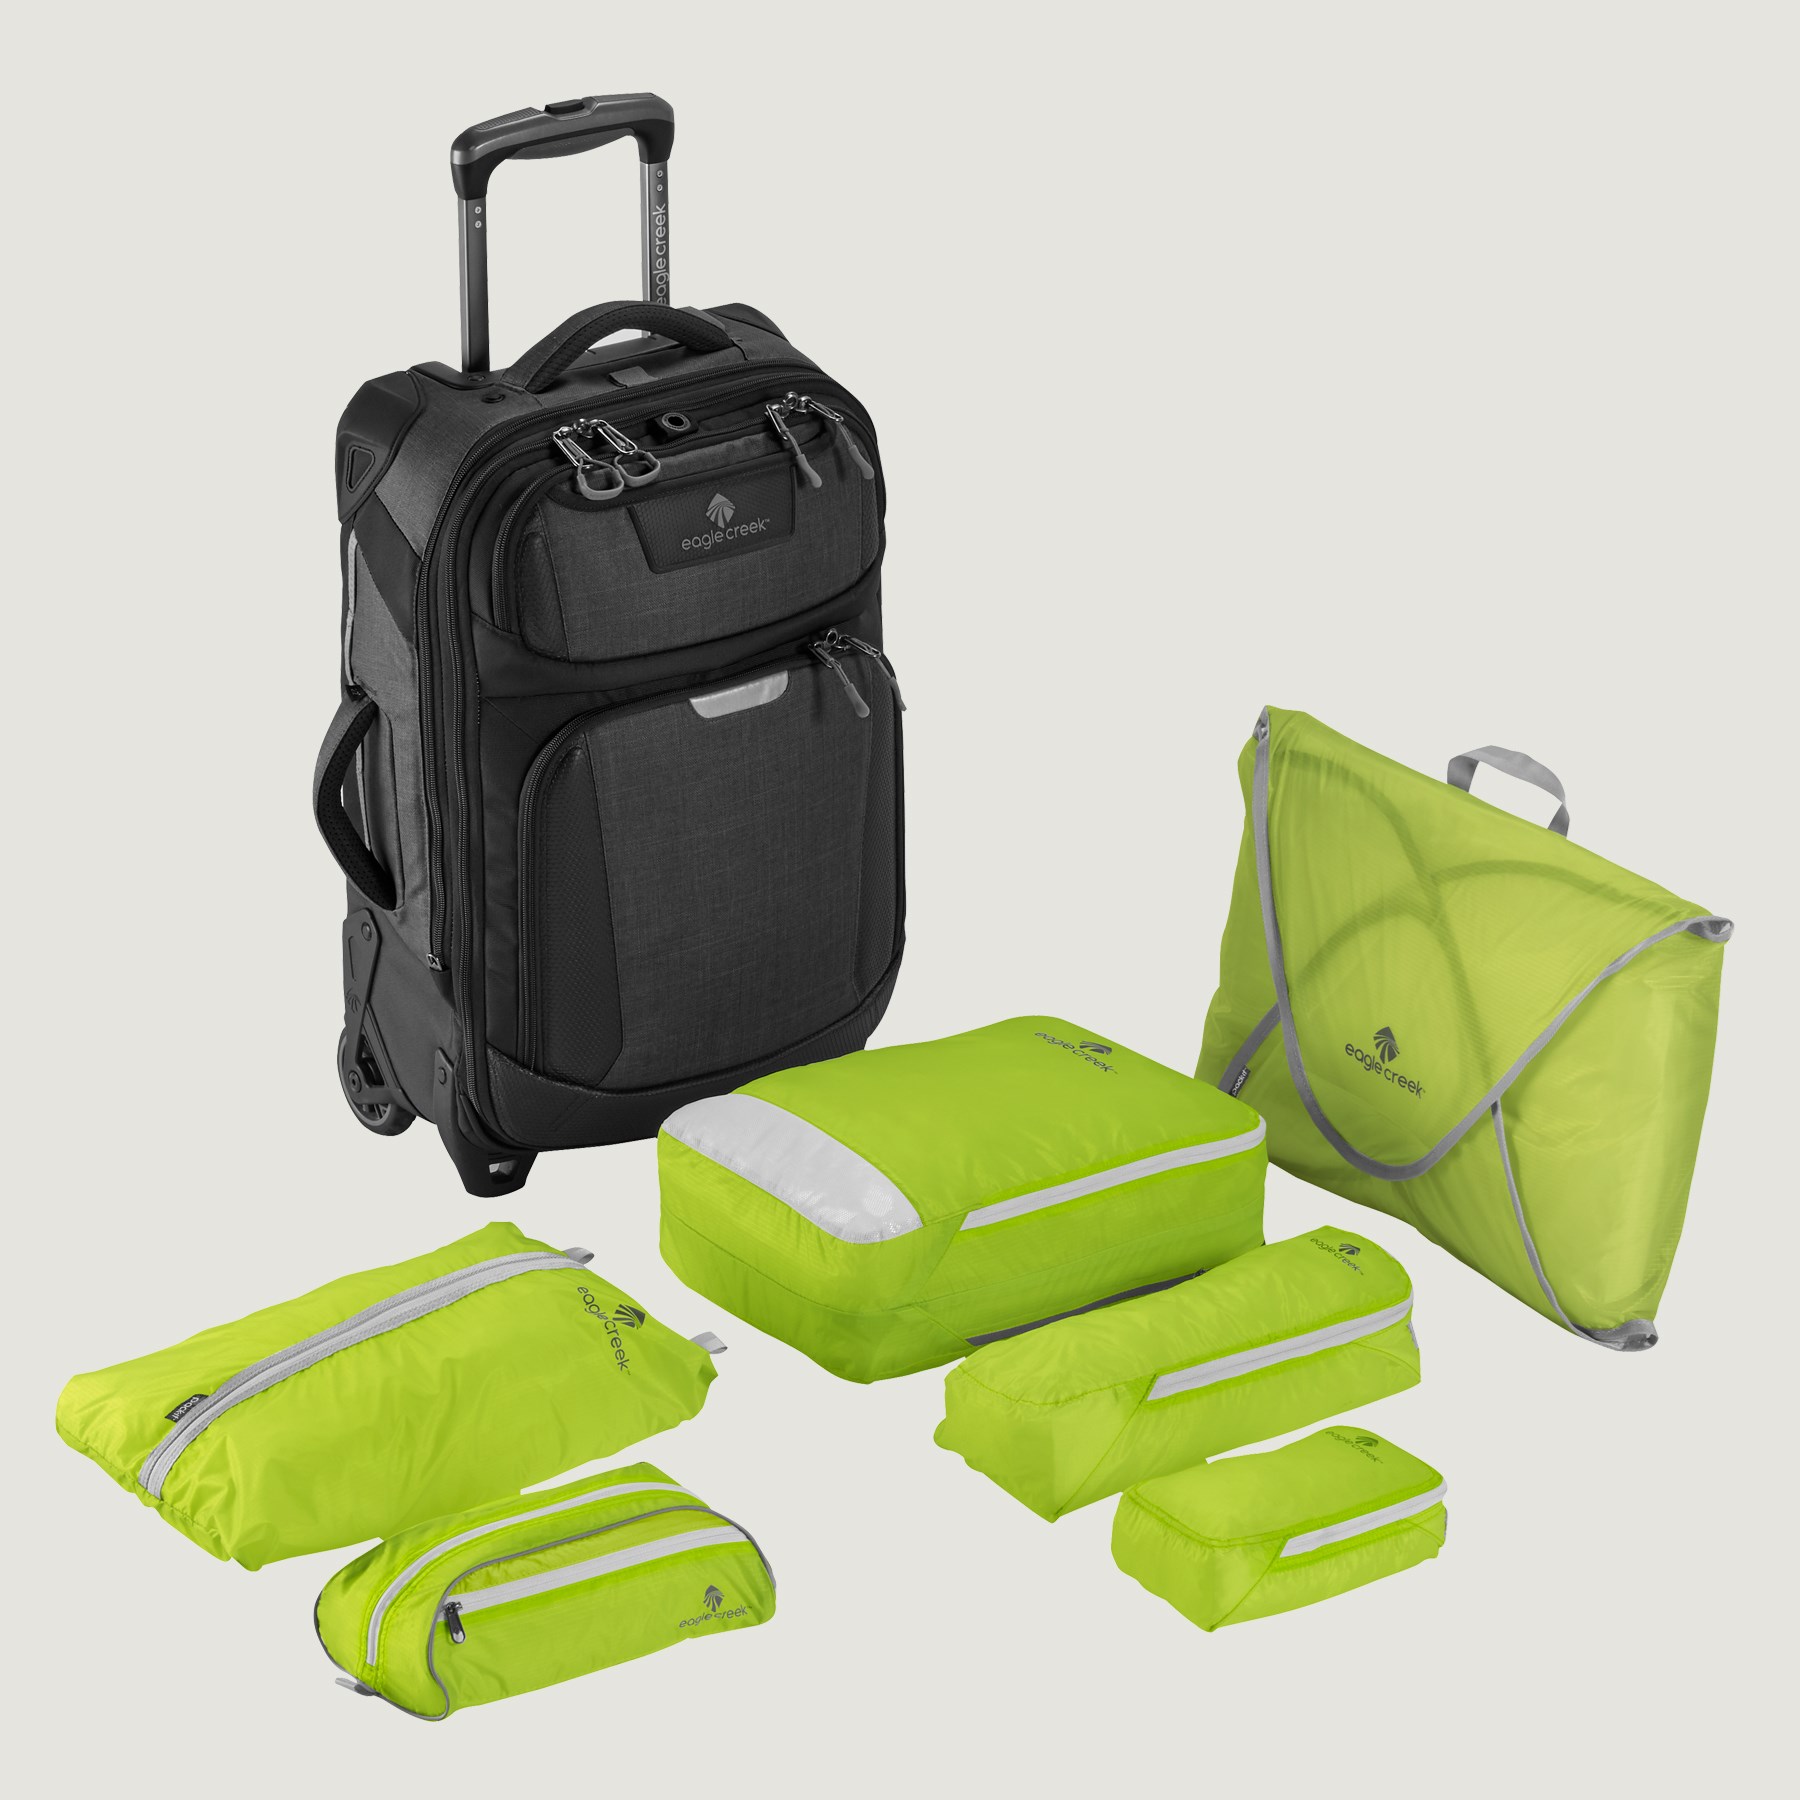 Eagle Creek Expanse Convertible Luggage and Gear Kit 2.jpg